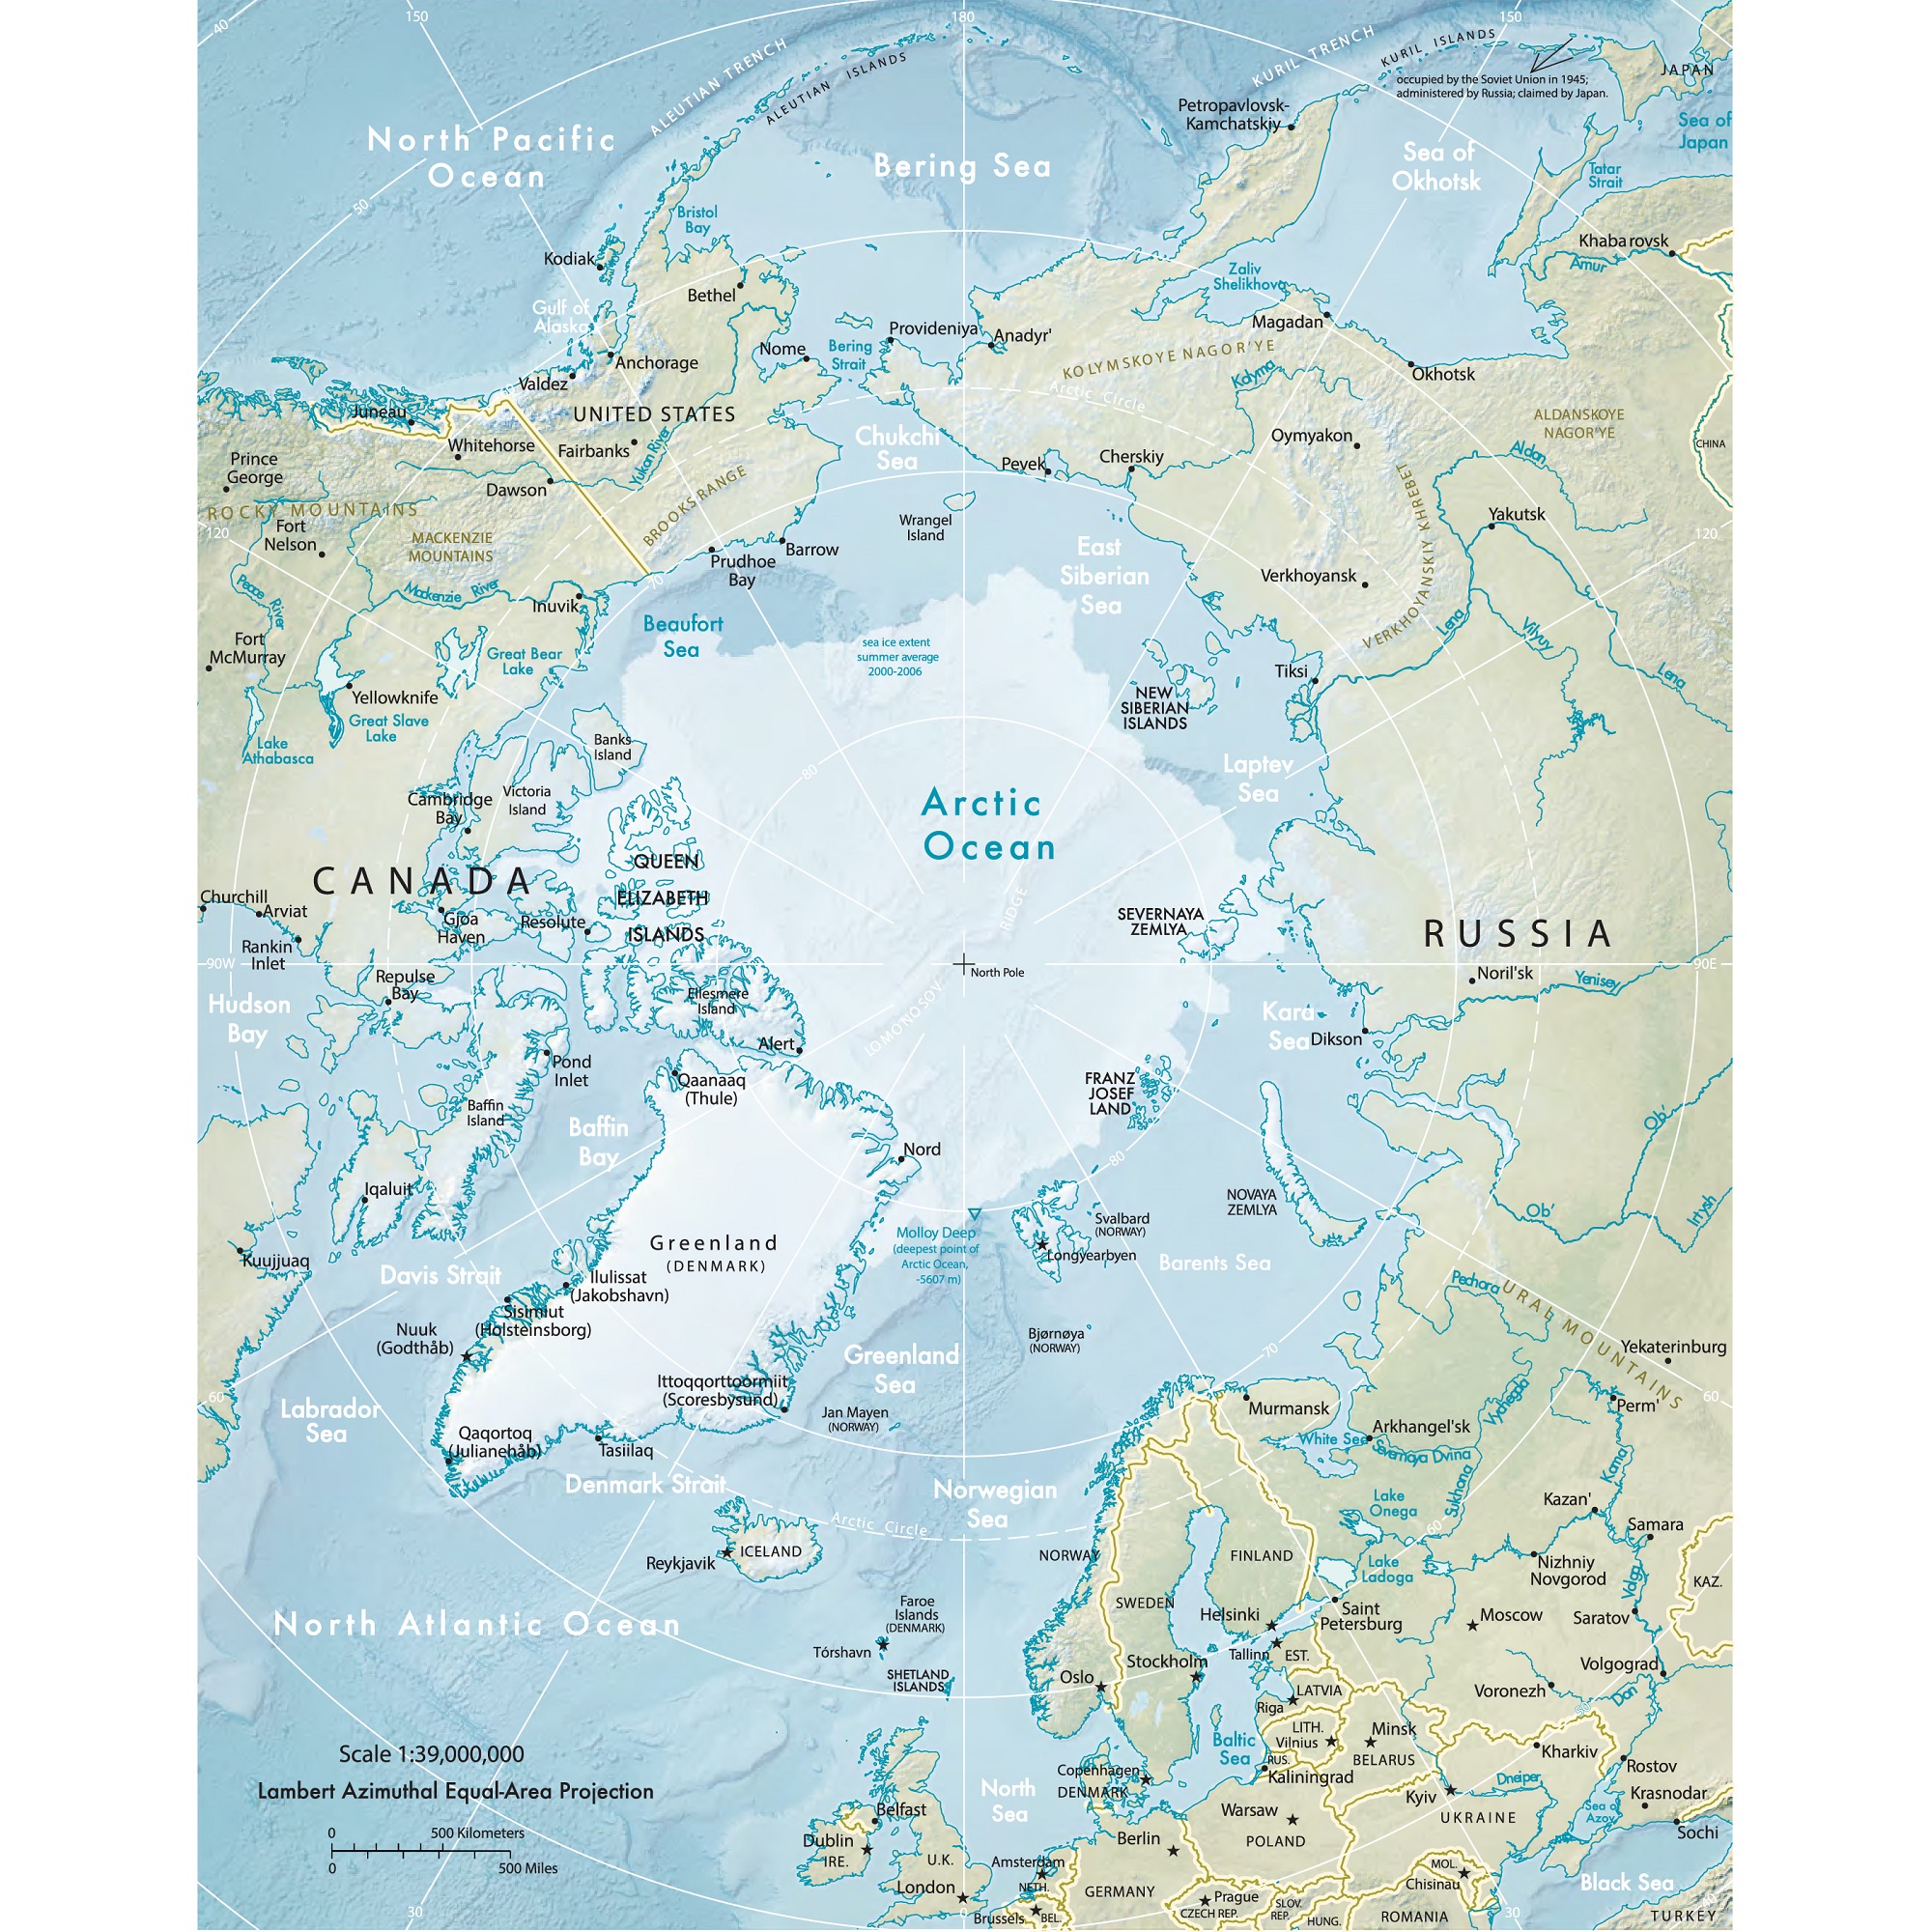 lllustration of the physical map of the Arctic region